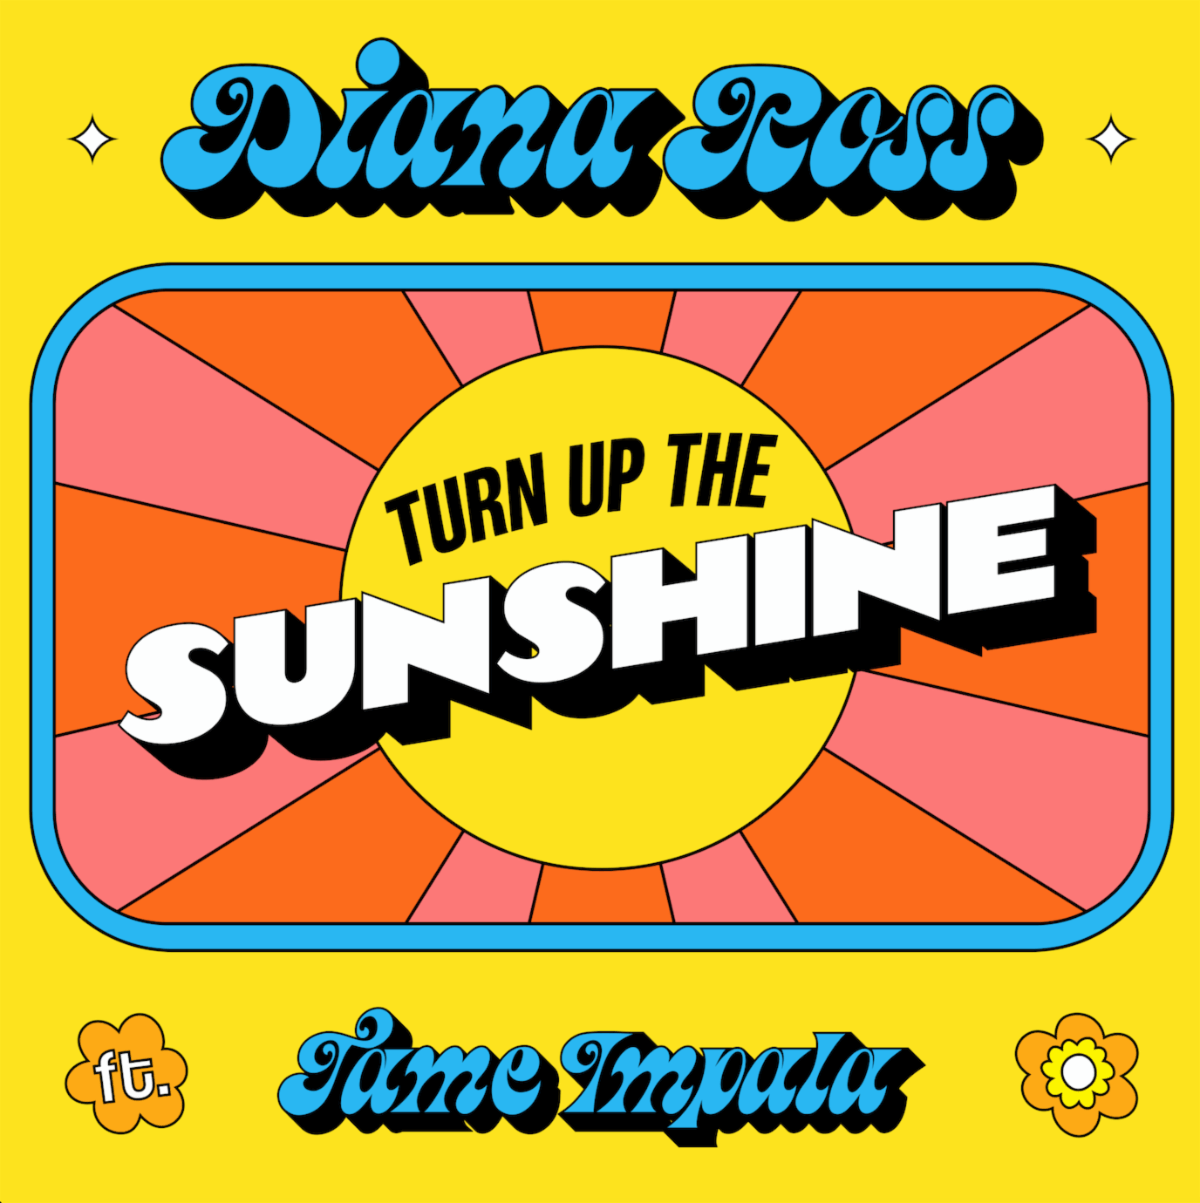 Tame Impala and Diana Ross collaborate on “Turn Up The Sunshine.” The track is off the soundtrack for Minions: Rise of the Guru